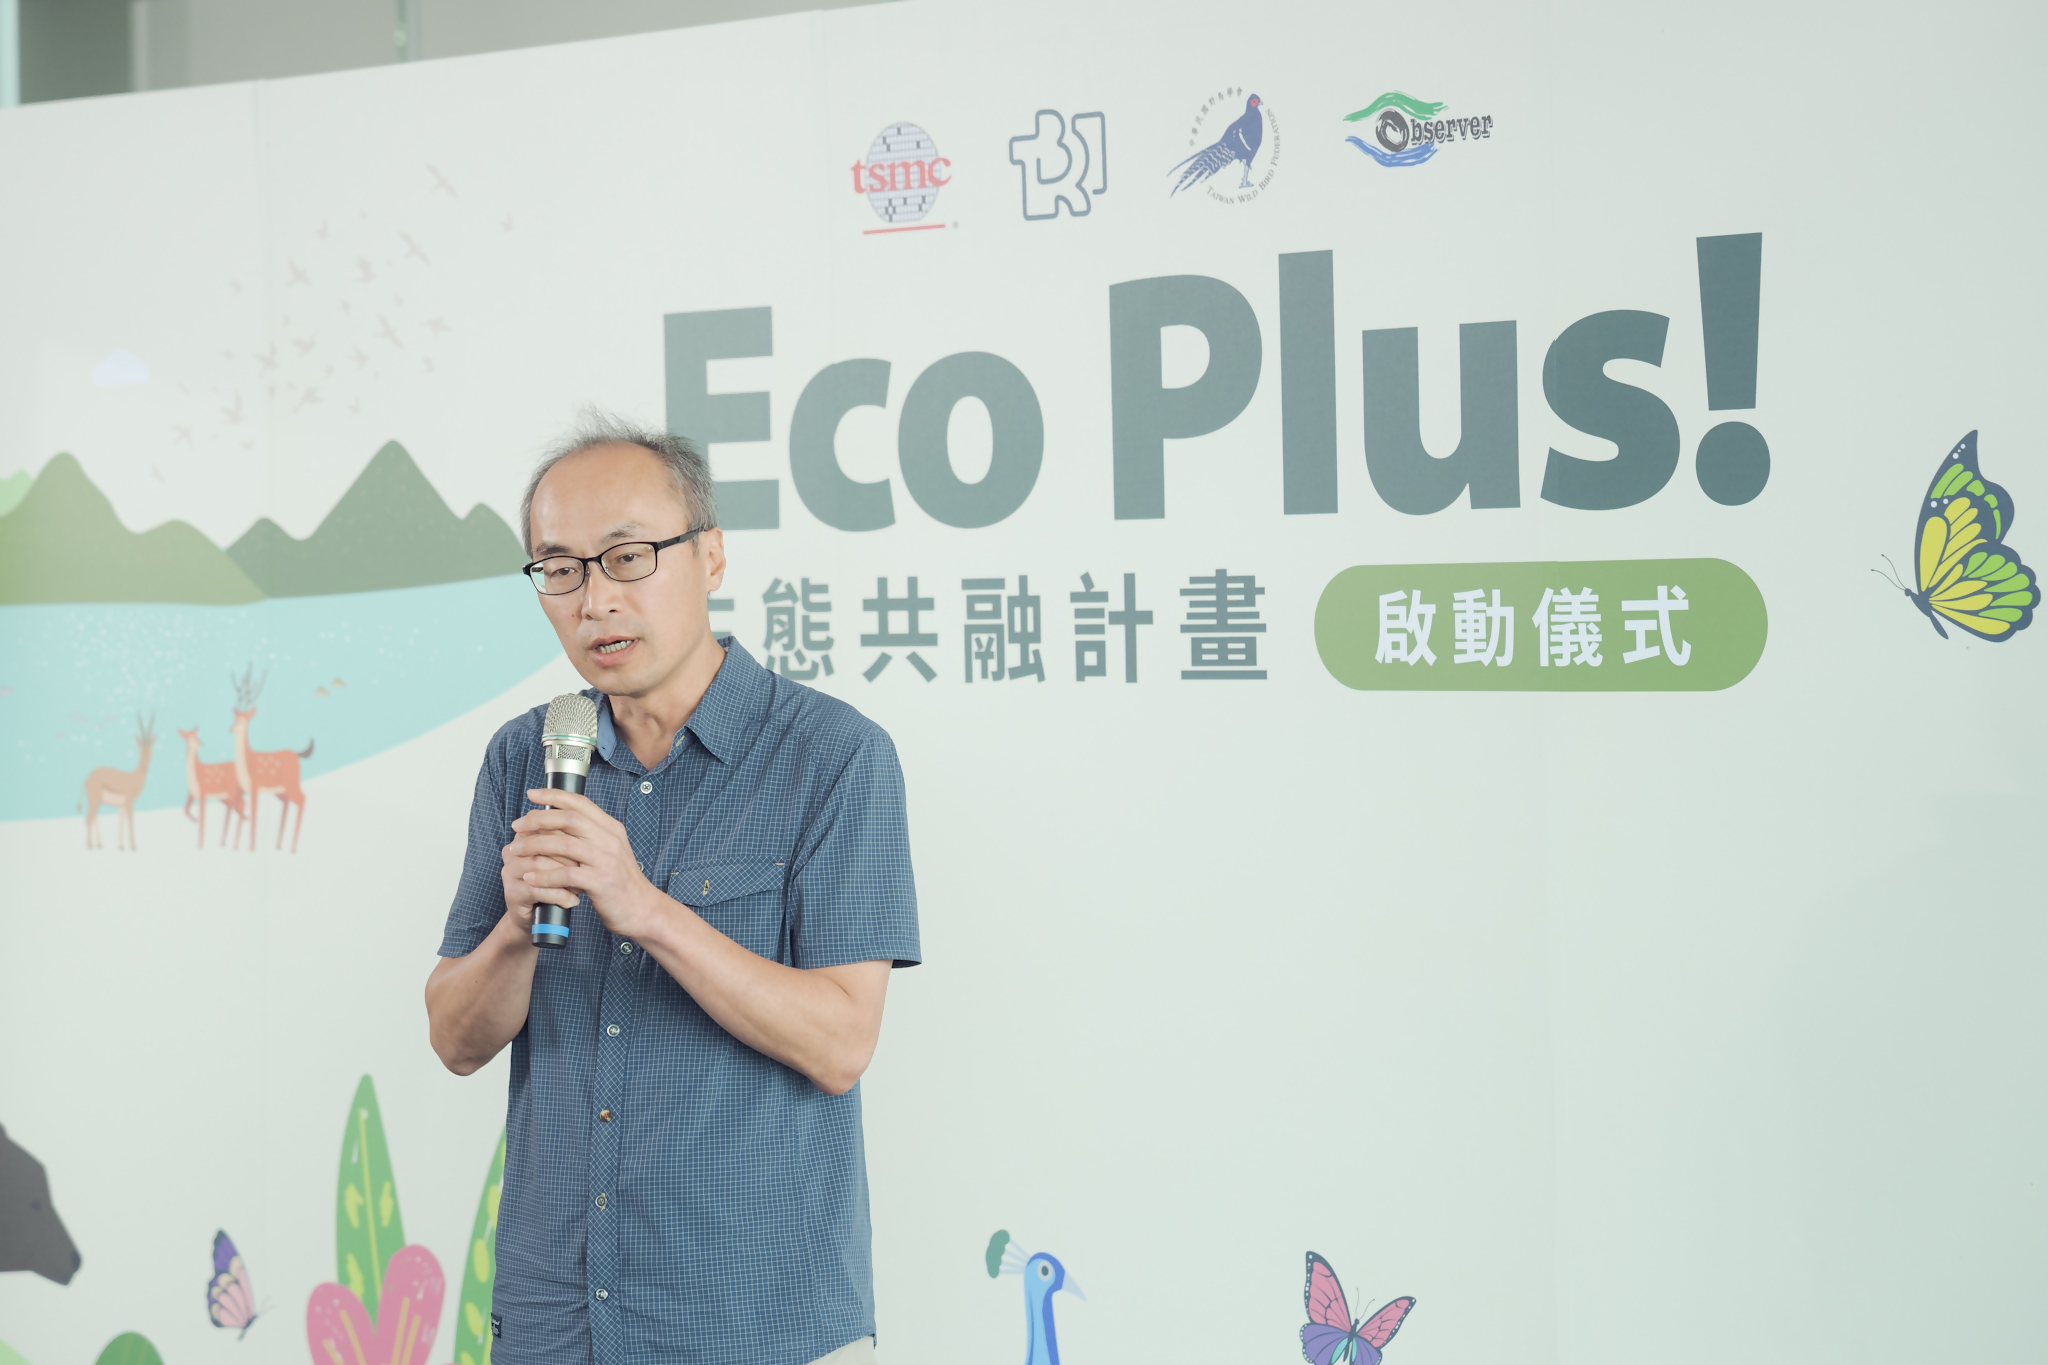 4_Lin Rui-xing, Director of the Ecosystem Management Division of the Biodiversity Research Institute of the Ministry of Agriculture, stated: We promote citizen scientists through the 